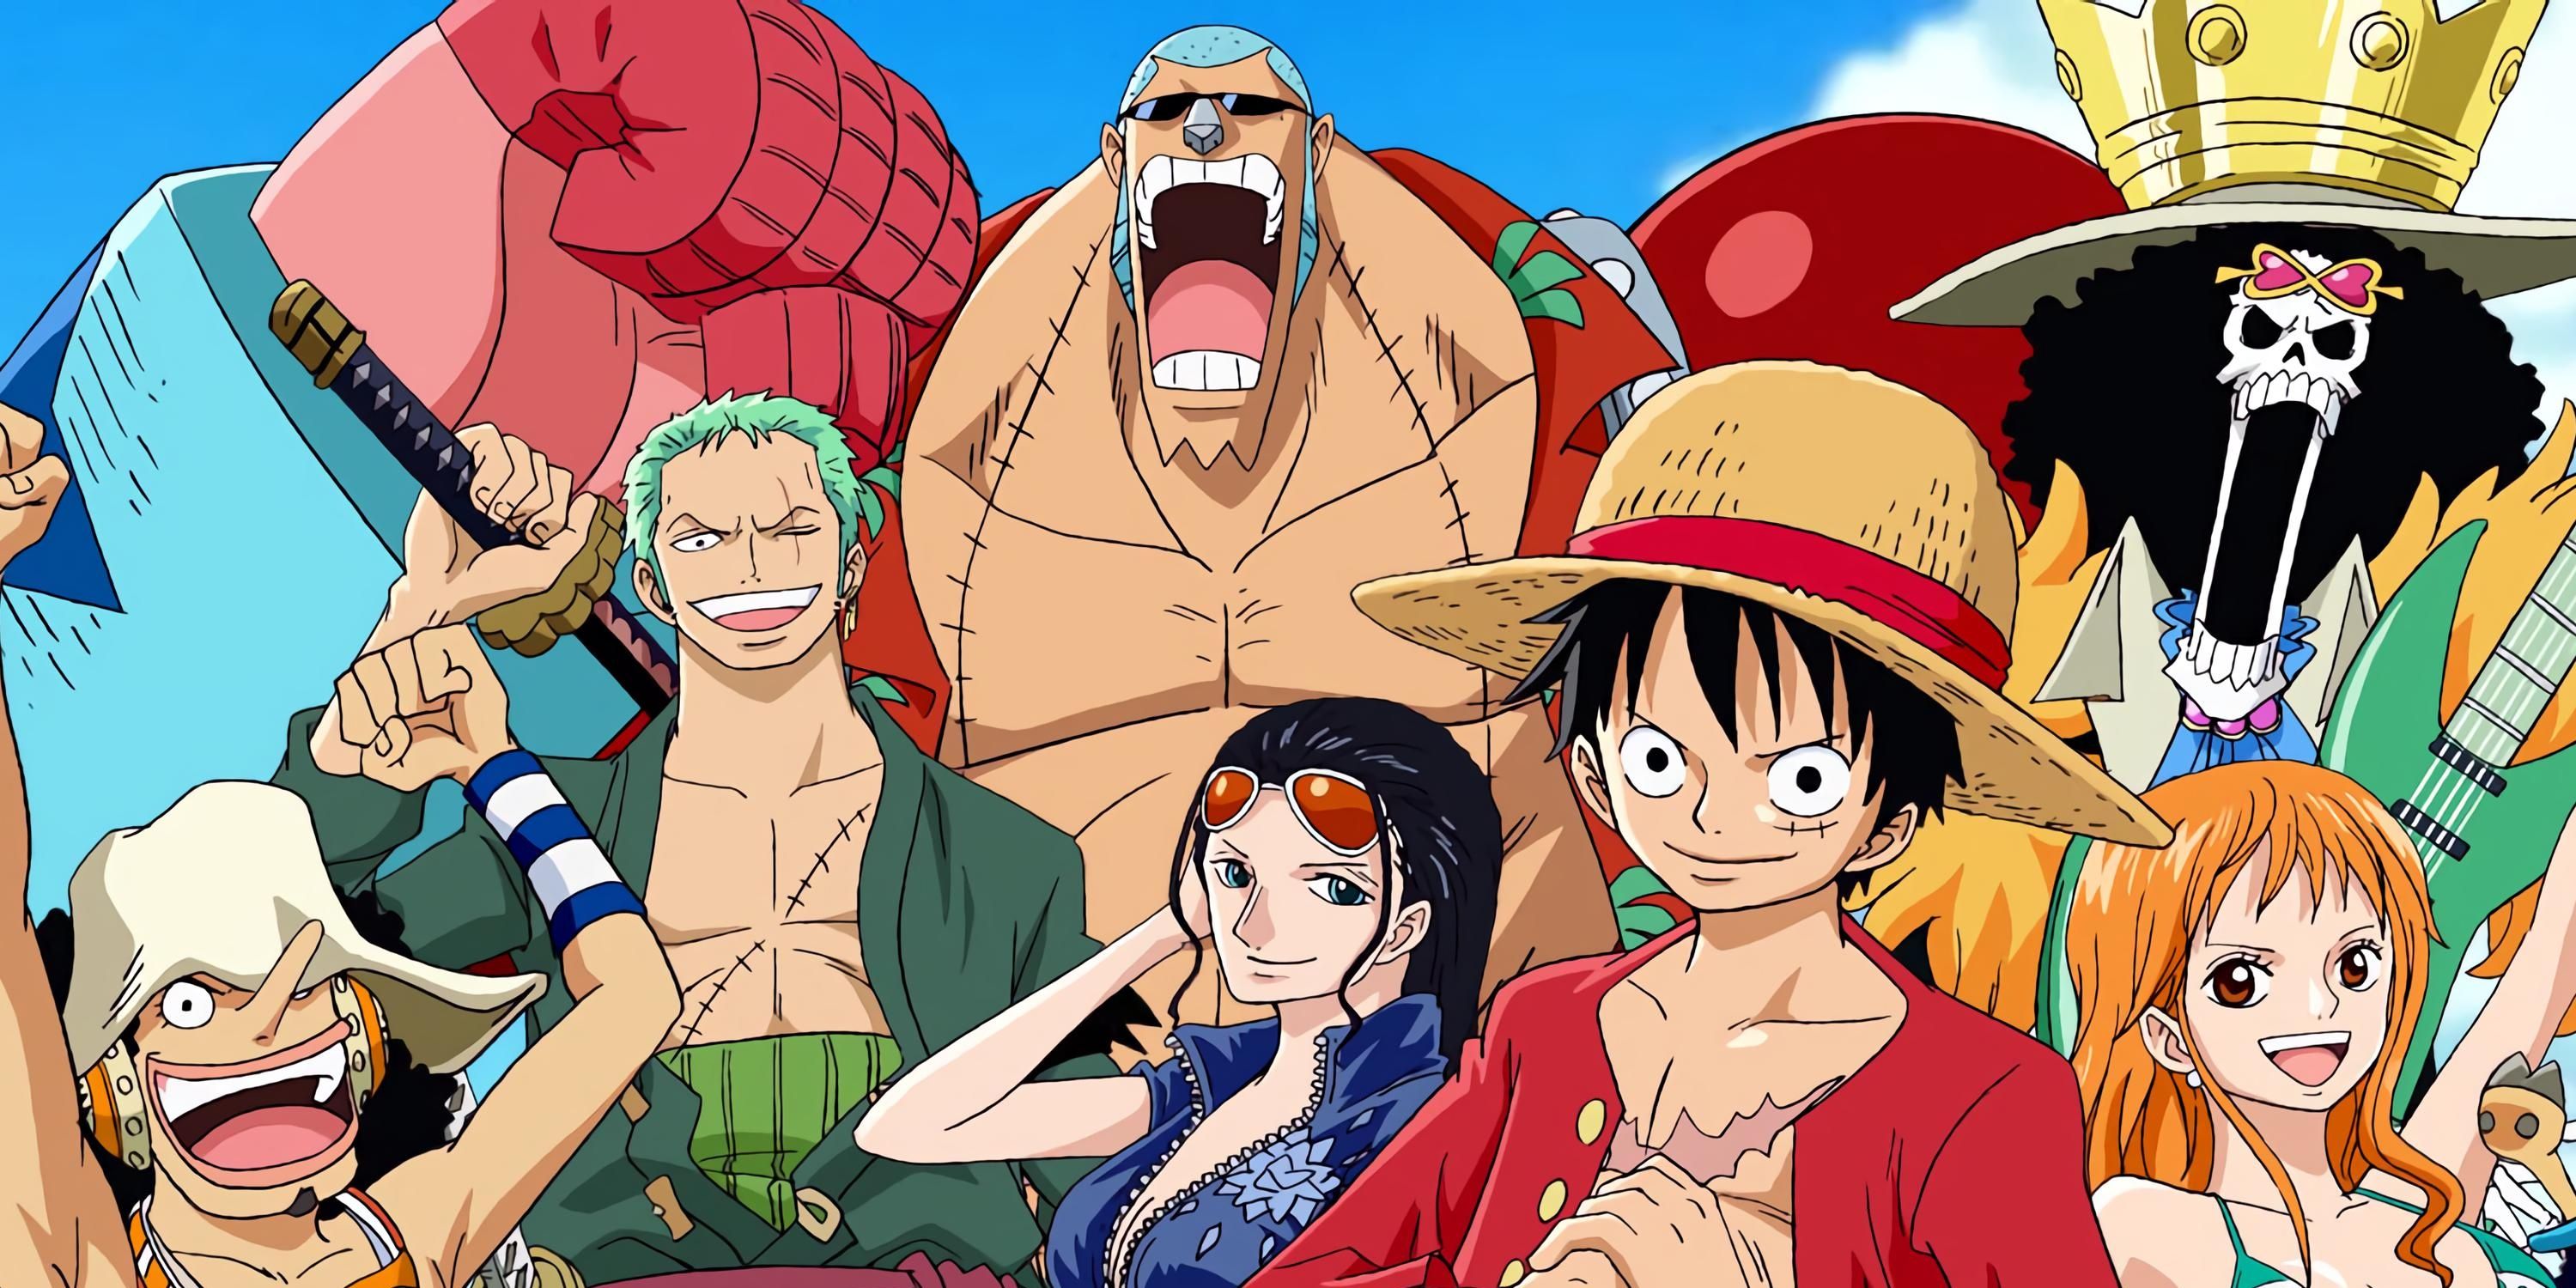 Straw Hat Pirates Members In Order 10 Things You Should Know About The Straw Hat Pirates